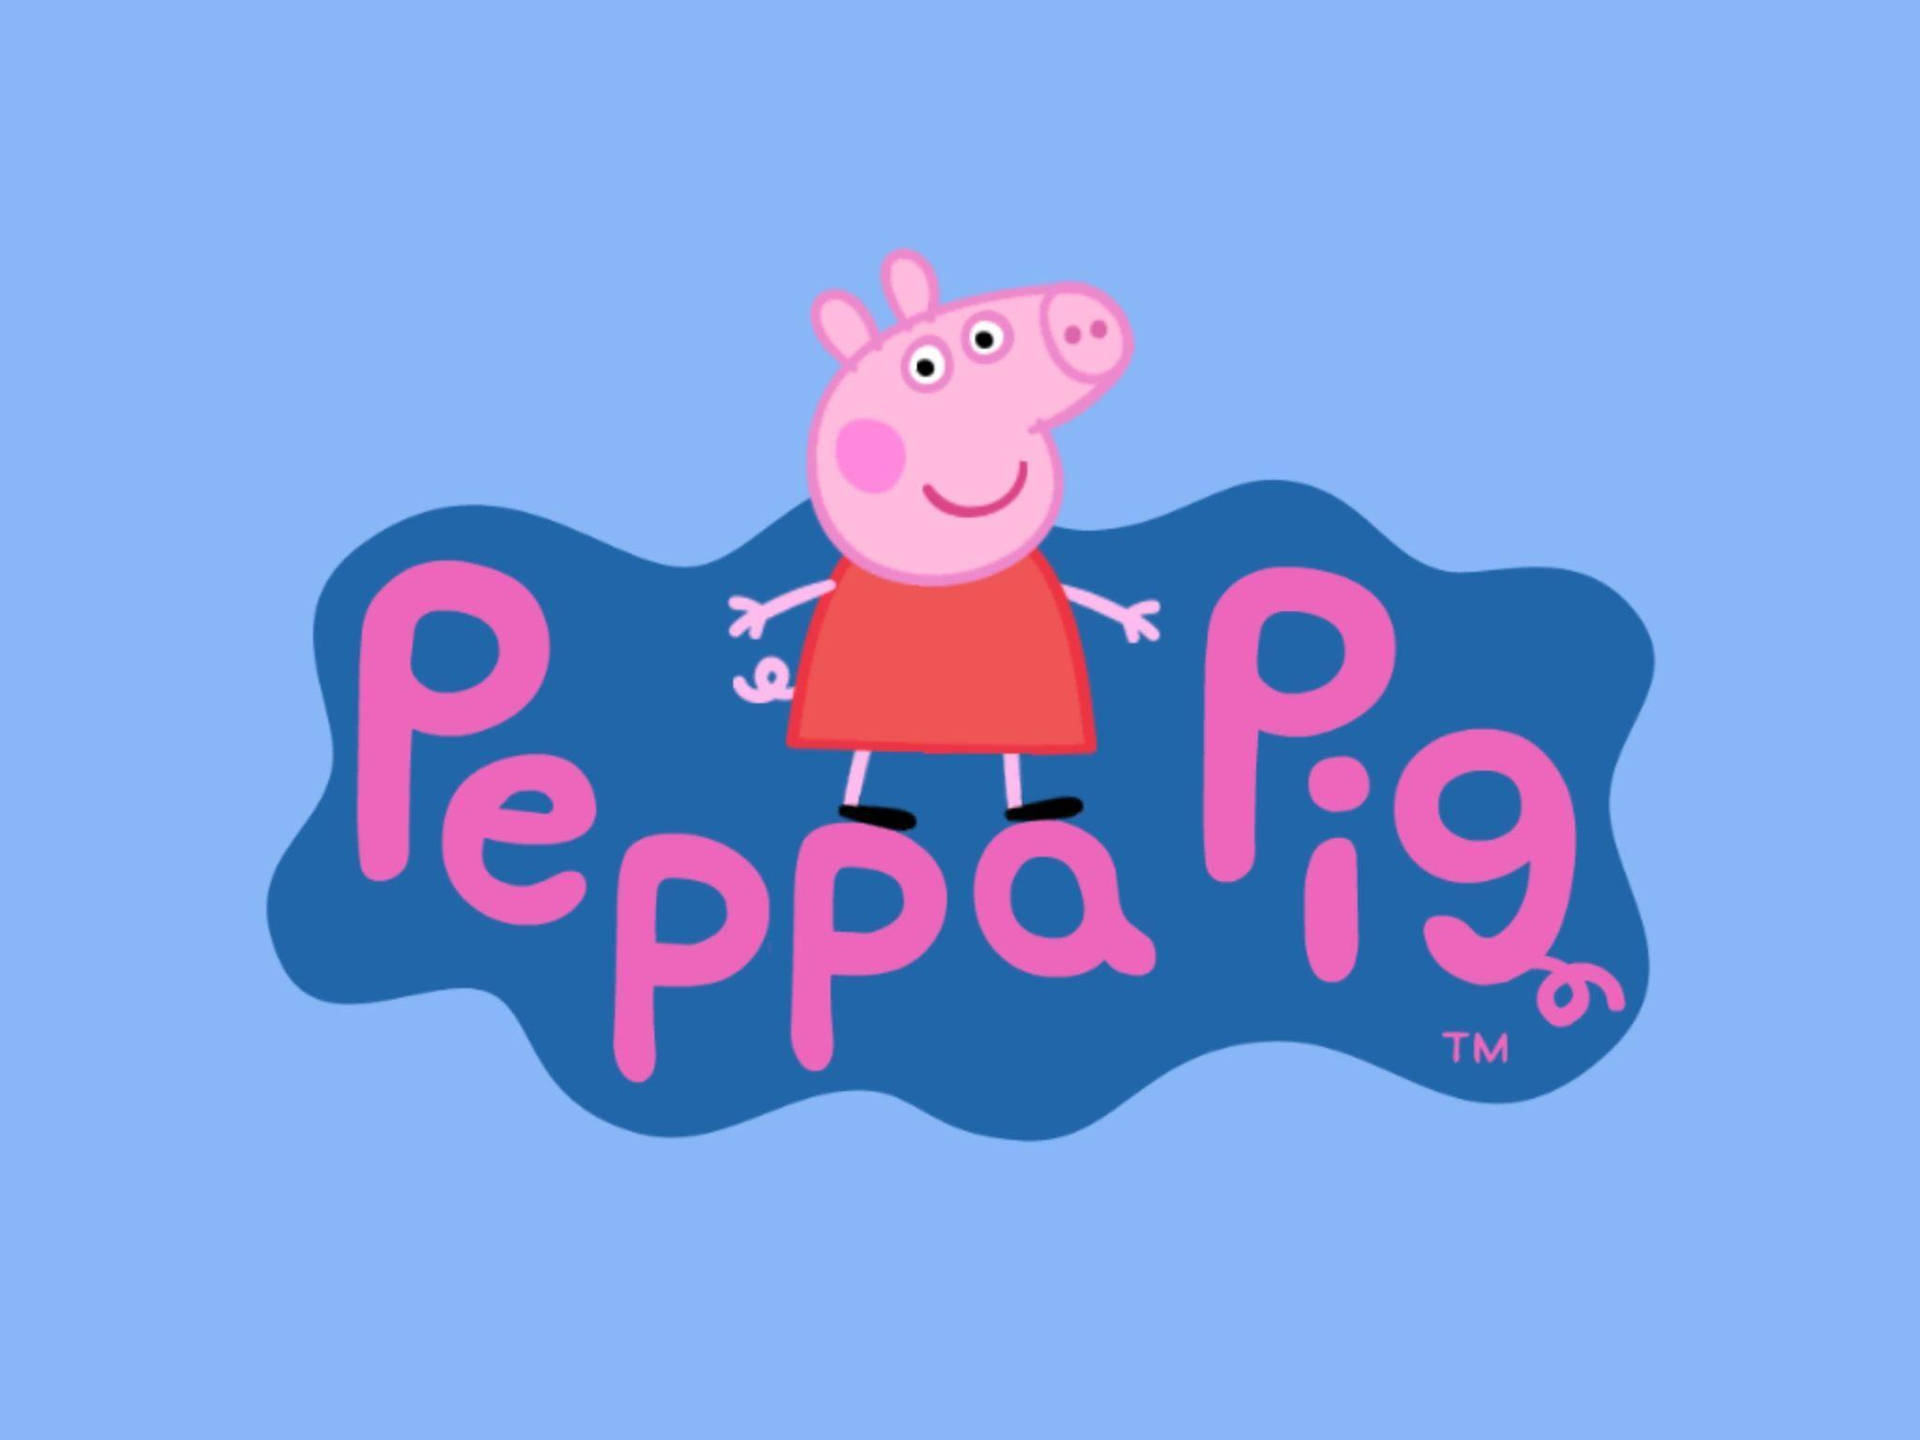 Adorable And Colorful Peppa Pig Tablet Design Background